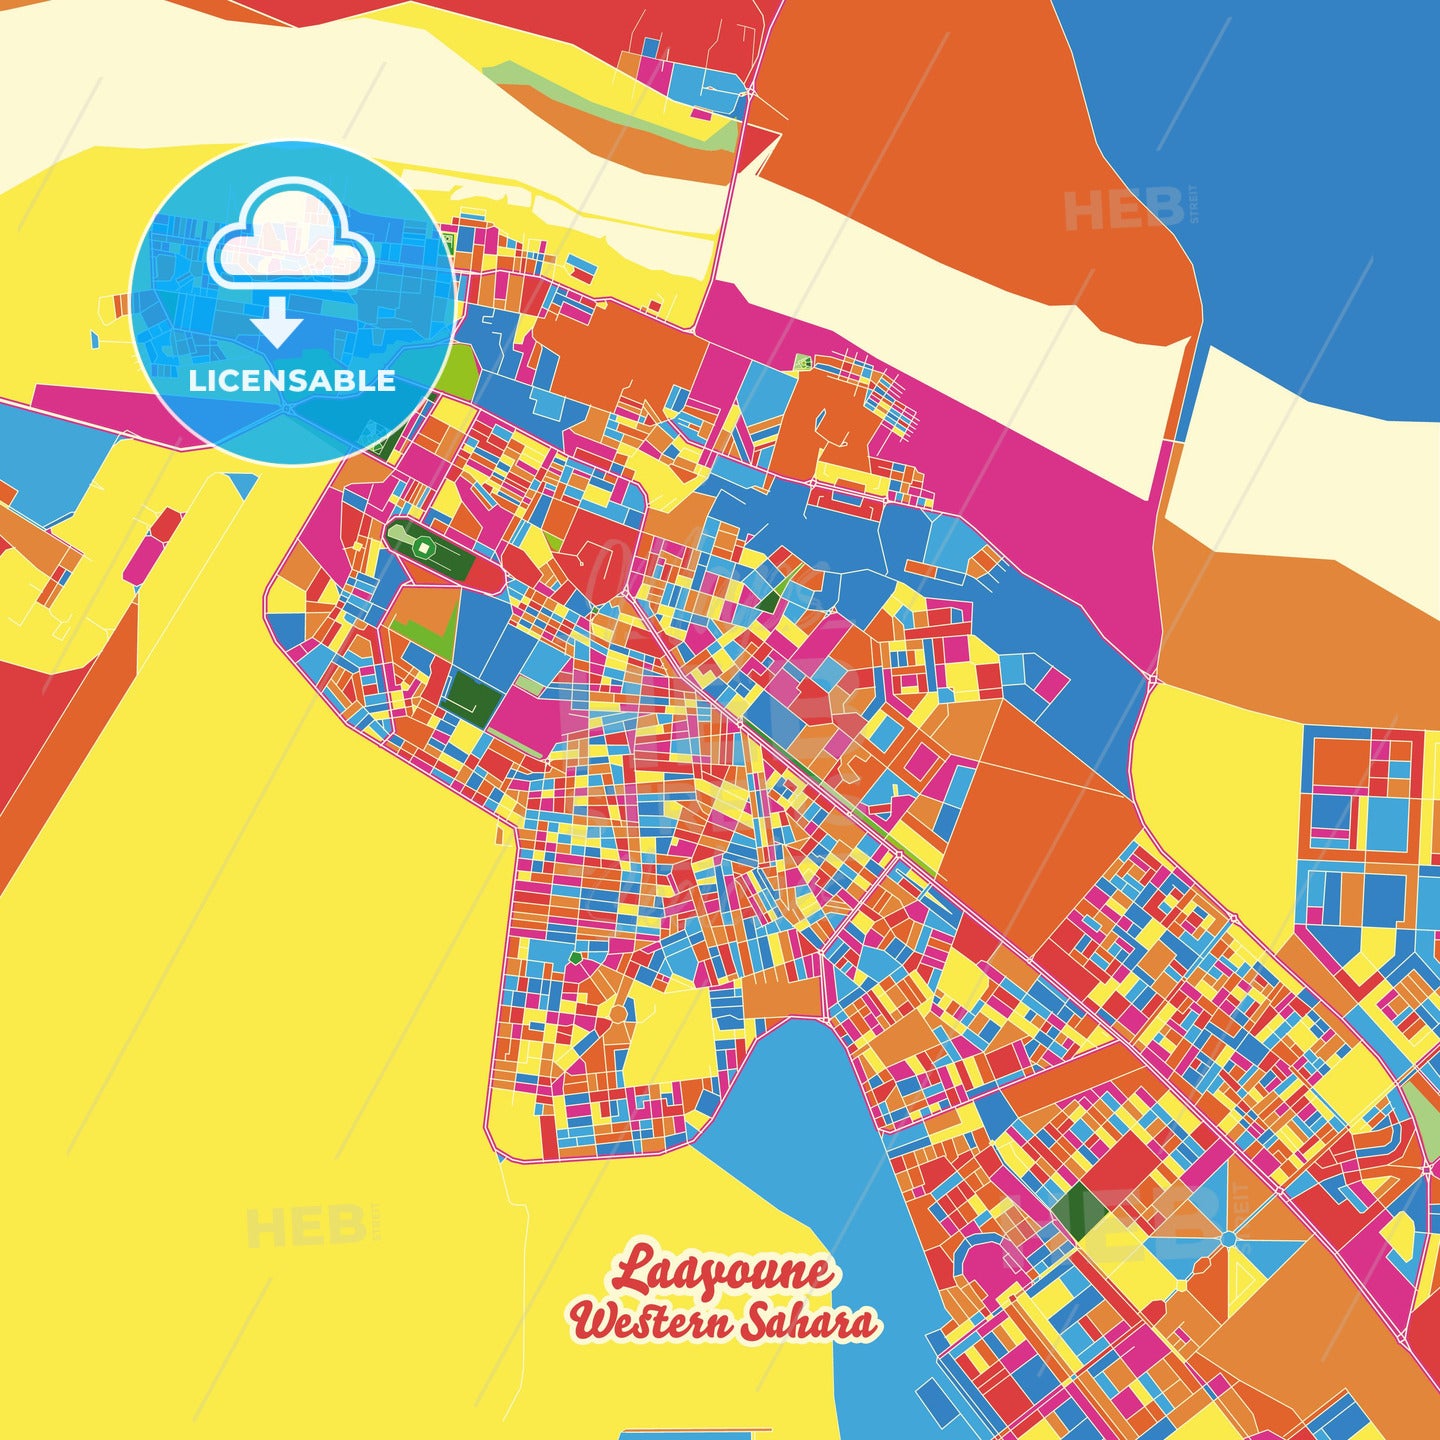 Laayoune, Western Sahara Crazy Colorful Street Map Poster Template - HEBSTREITS Sketches